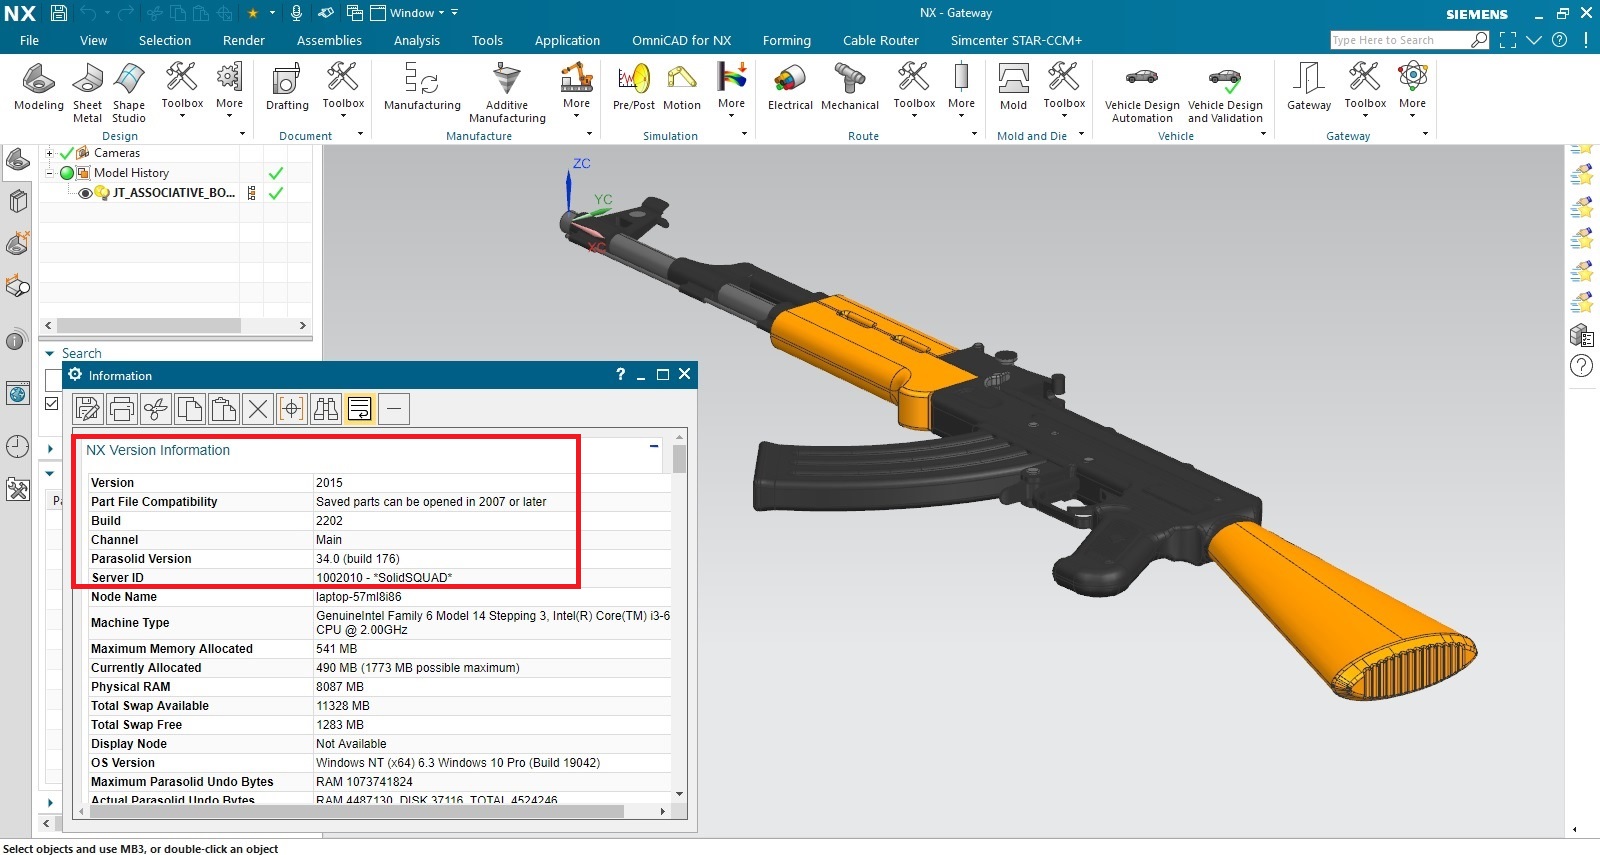 Working with Siemens NX 2015 Build 2202 full